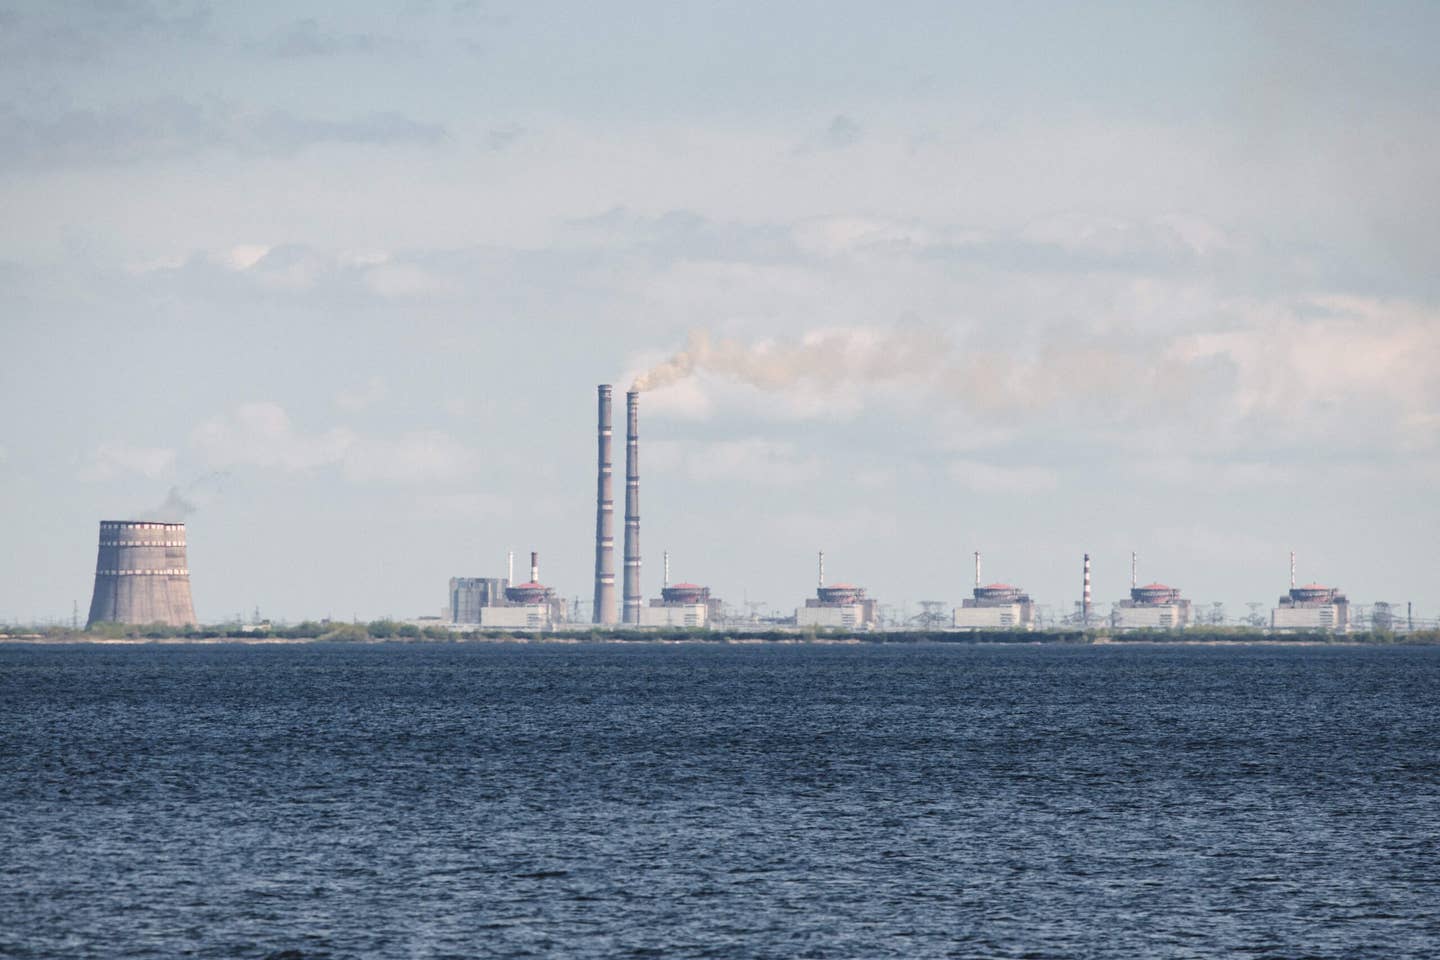 The Zaporizhzhia nuclear power plant situated in the Russian-controlled area of Enerhodar. <em>Credit: Ed Jones/AFP via Getty Images</em>